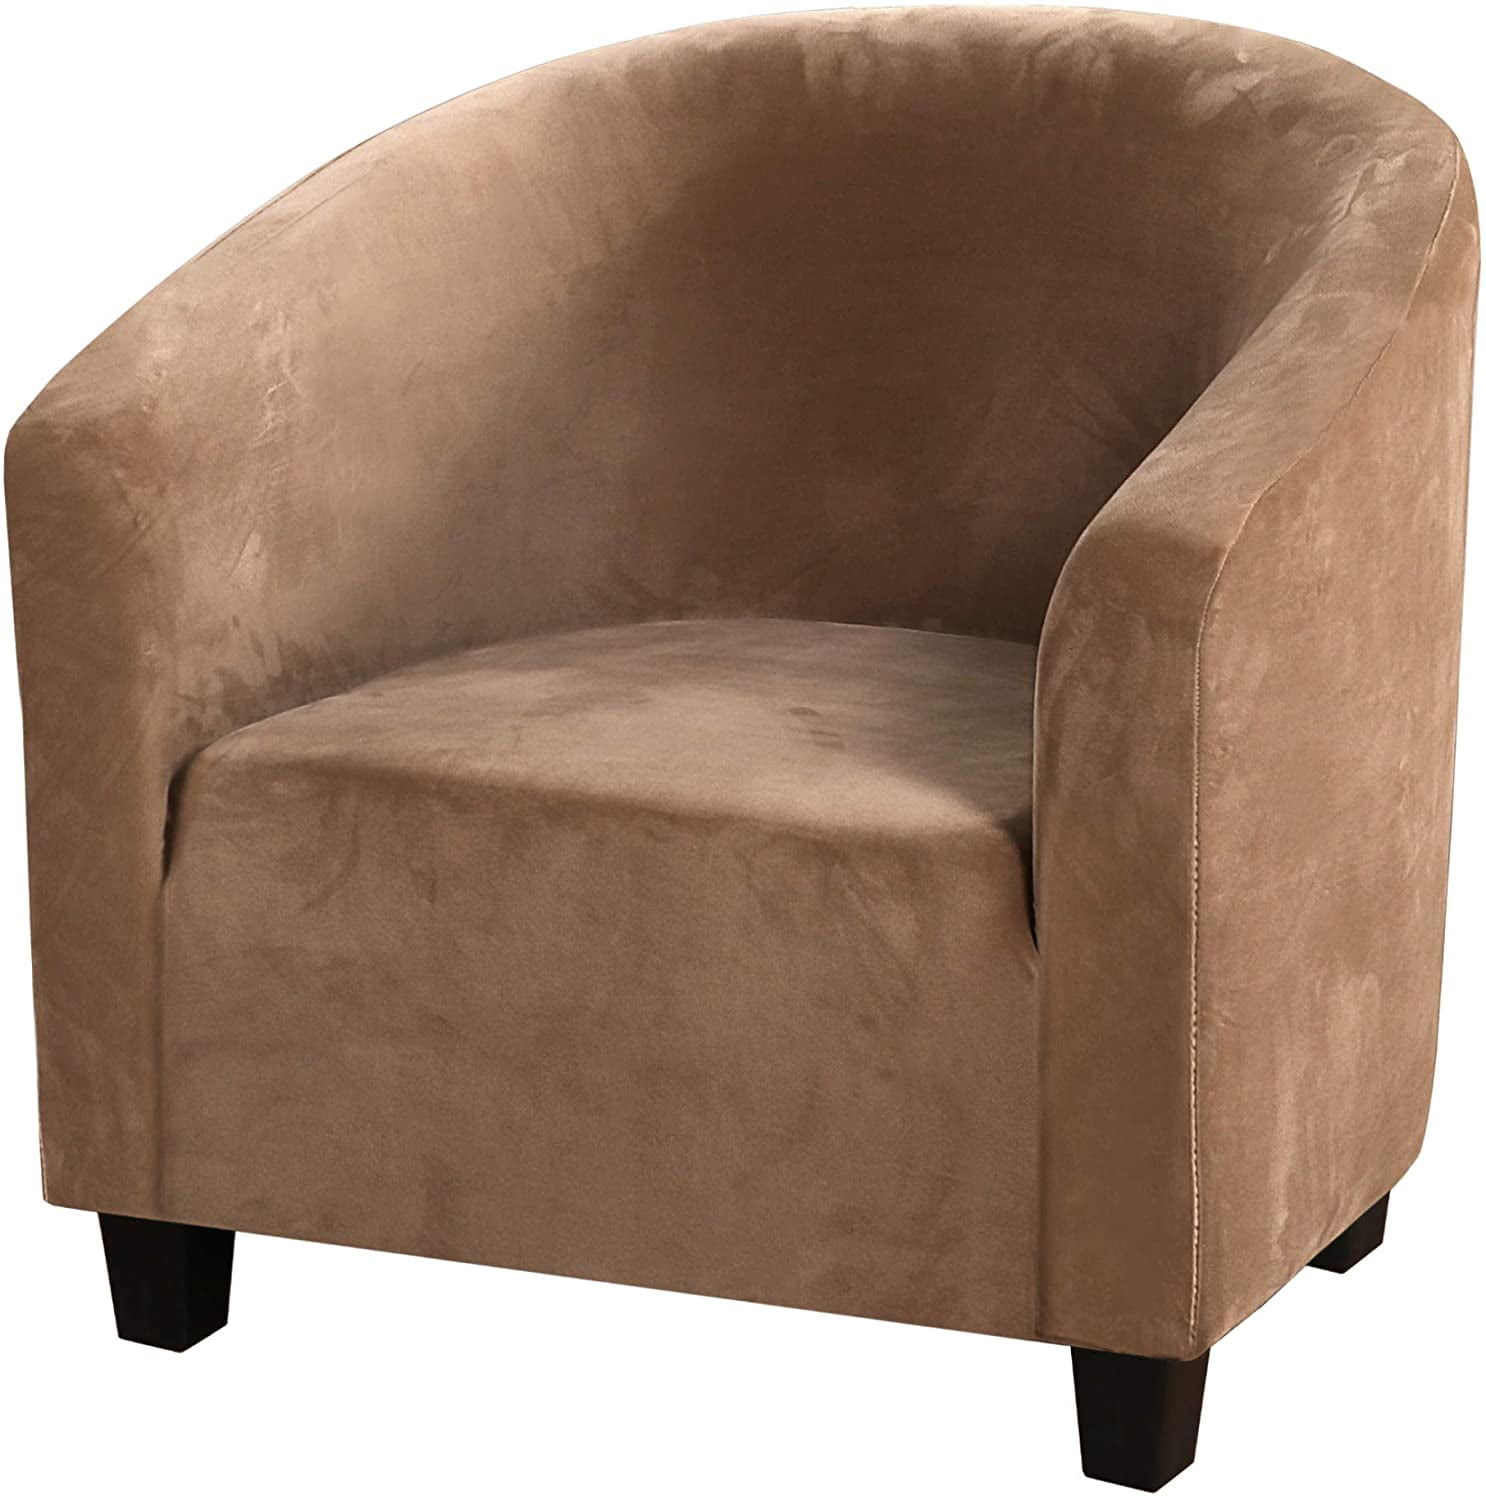 Details about   High Stretch Club Chair Cover Tub Chair Cover Armchair Sofa Slipcover with Elast 